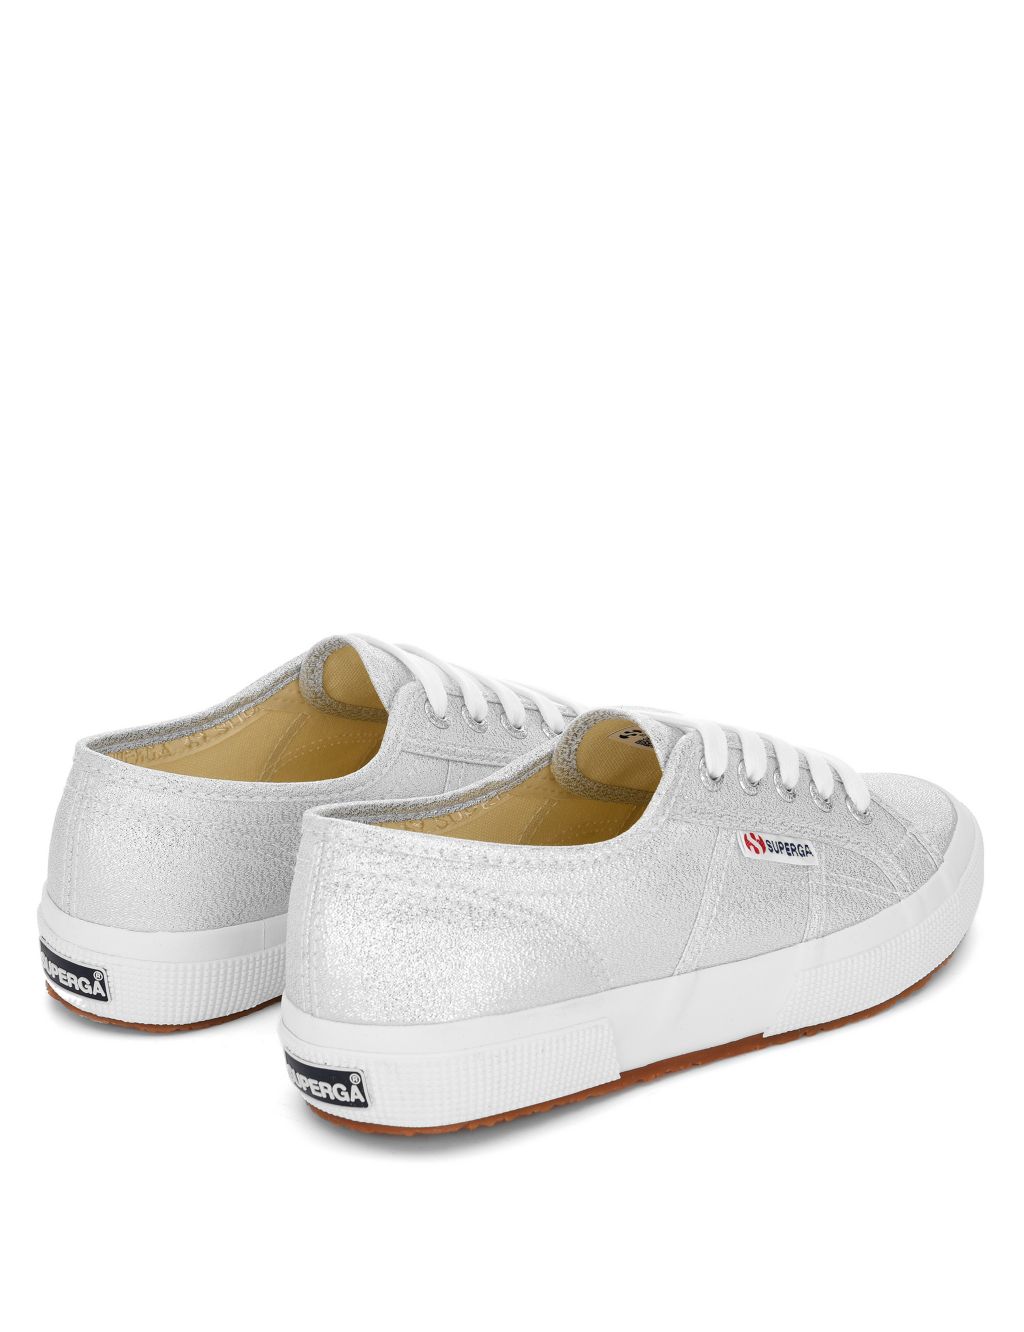 Canvas Lace Up Glitter Trainers image 4